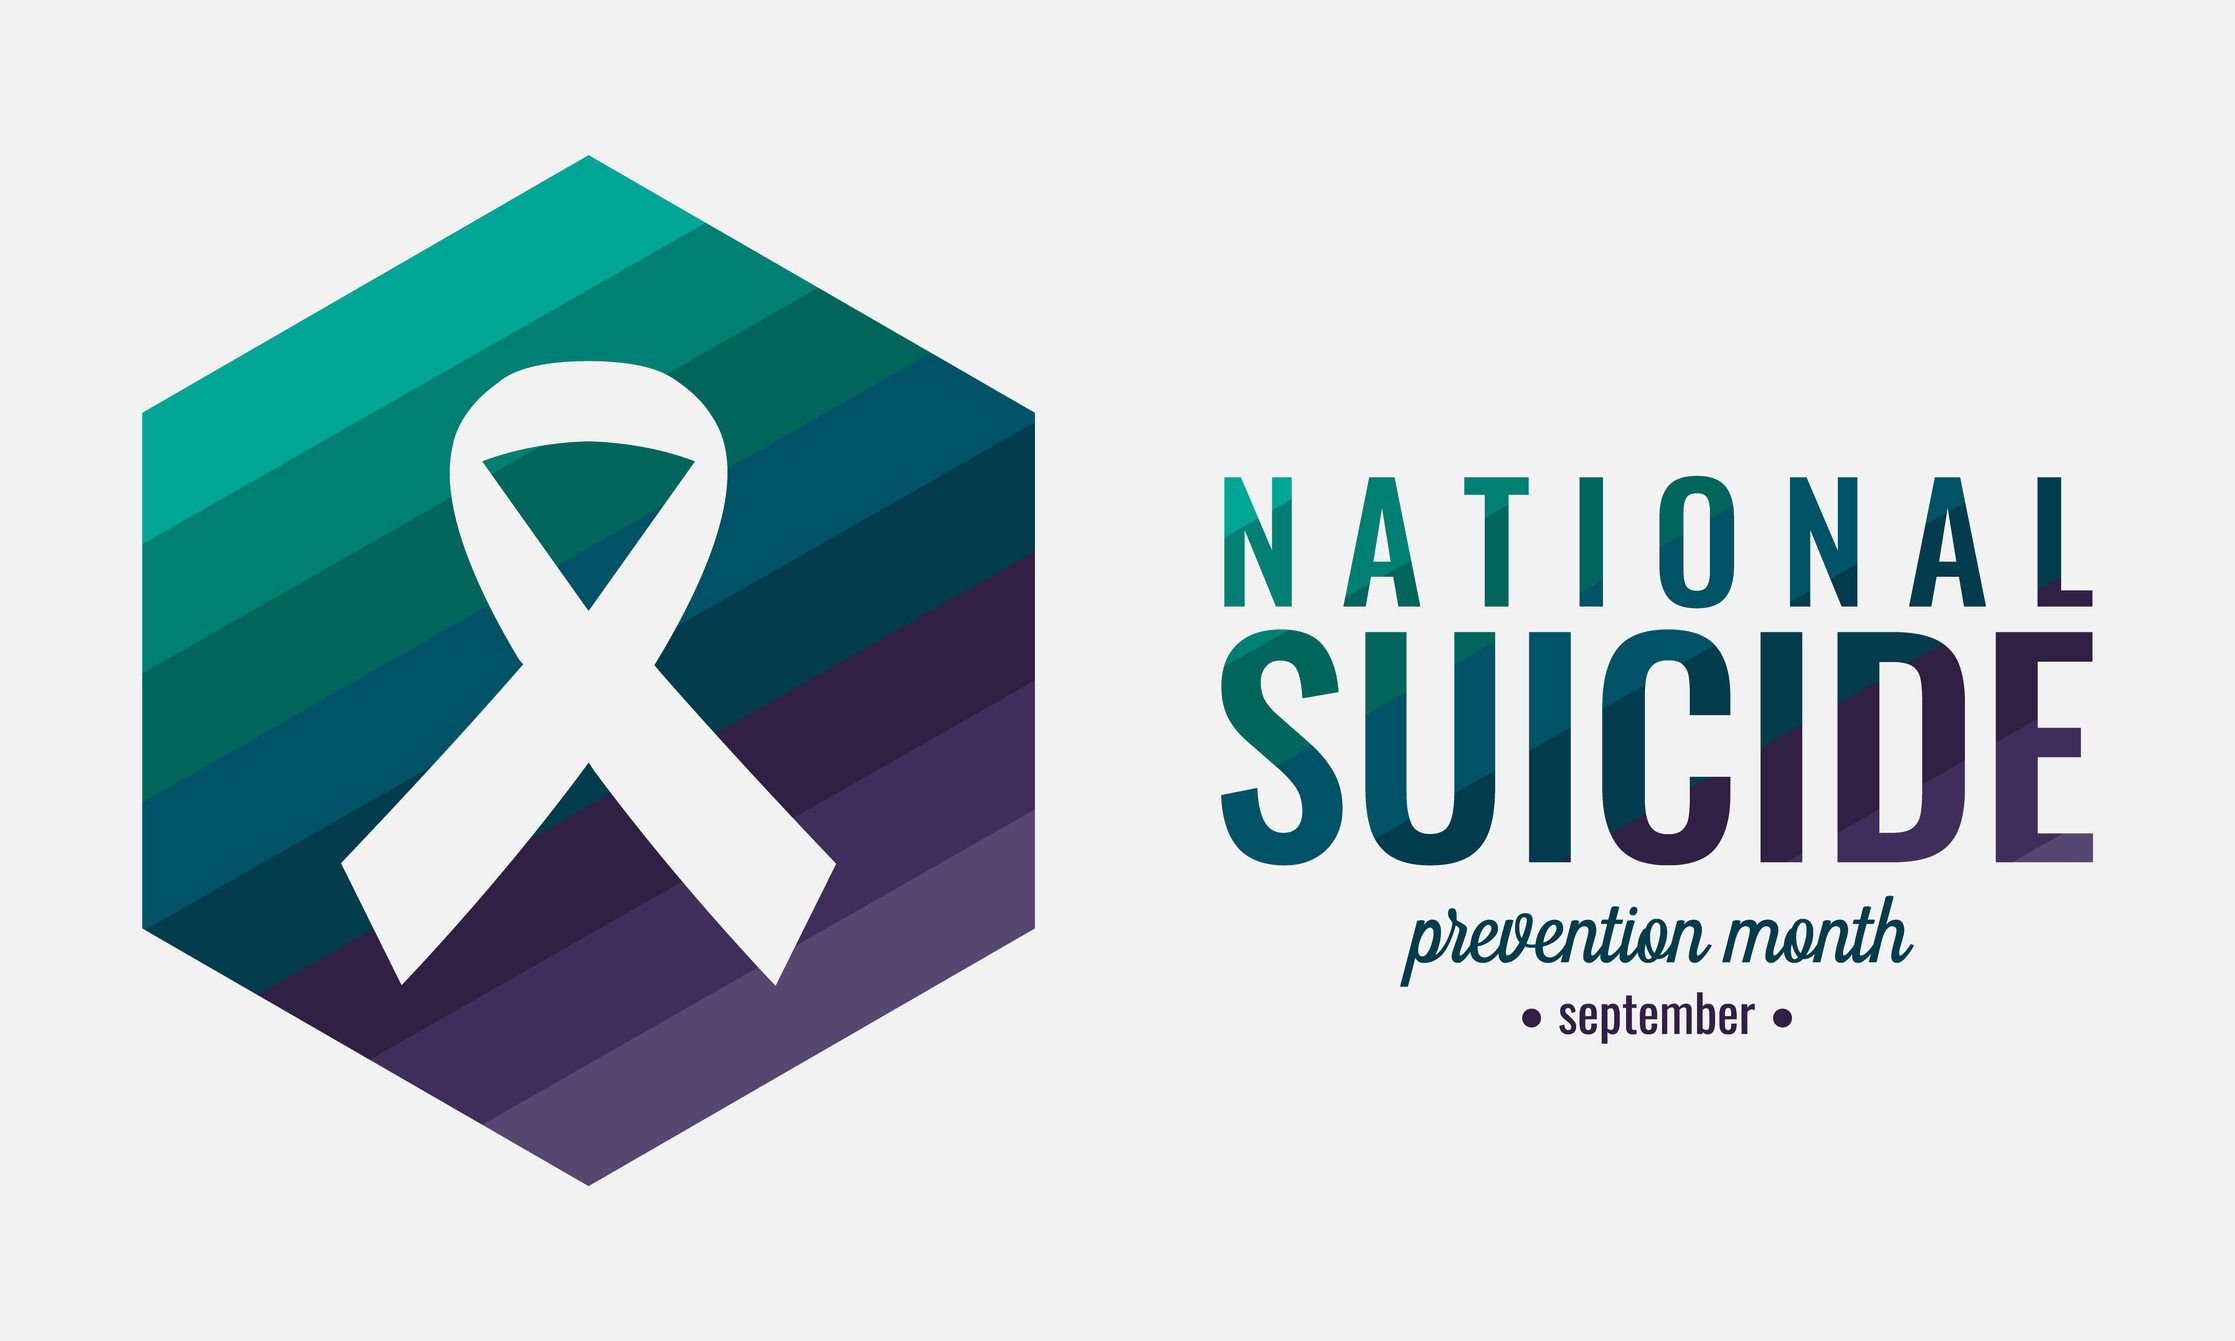 Suicide Prevention Awareness Month How Can We Do Better?